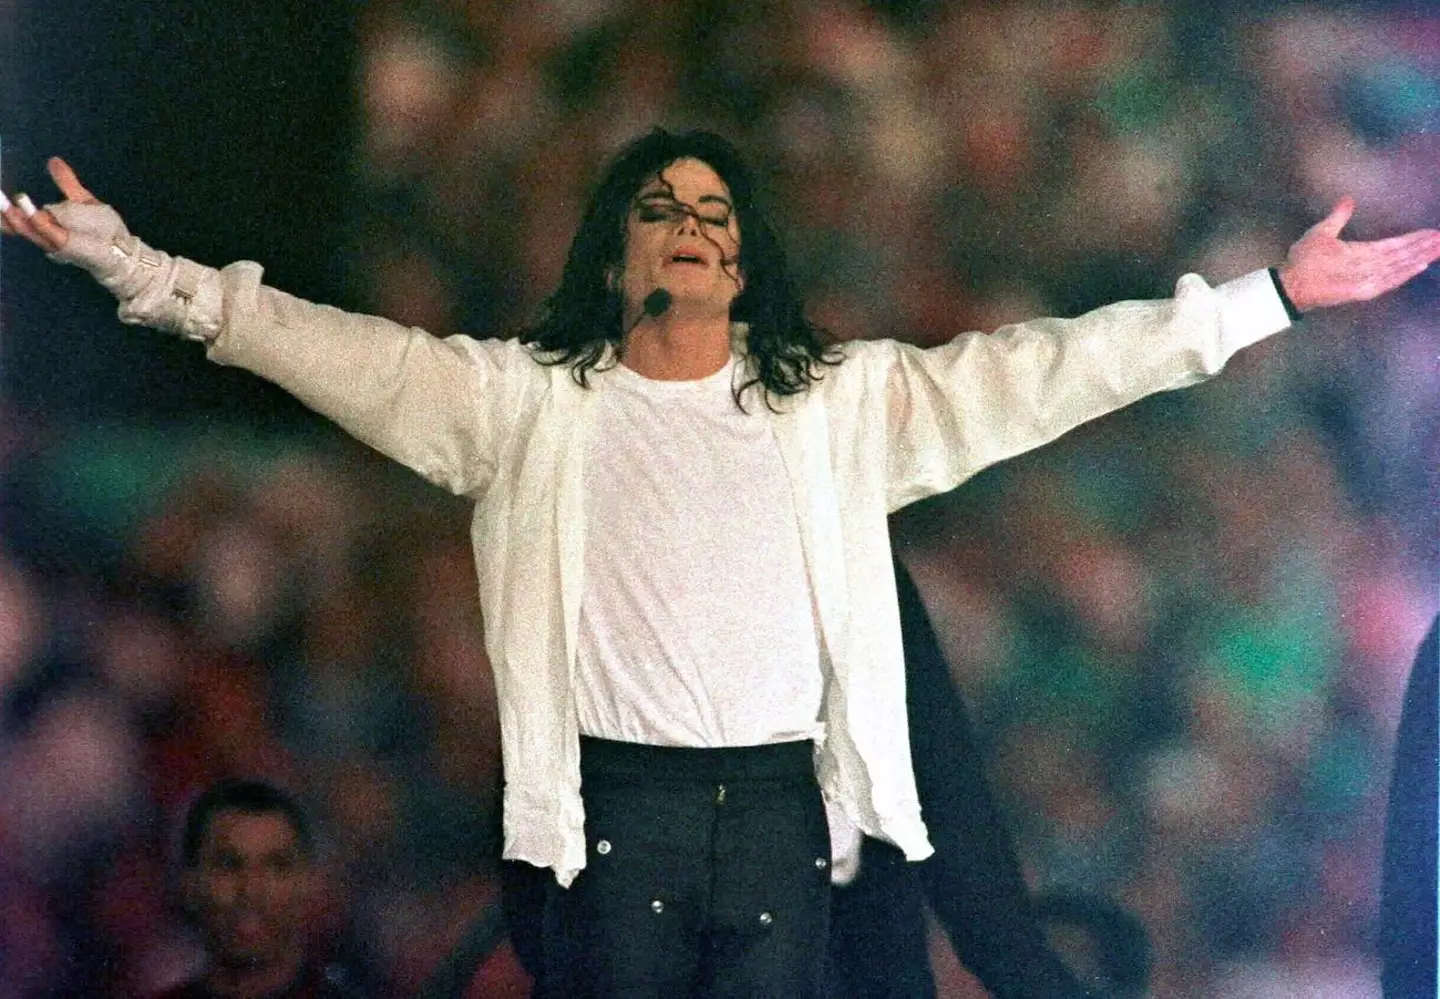 The King of Pop gave a memorable performance in 1993.